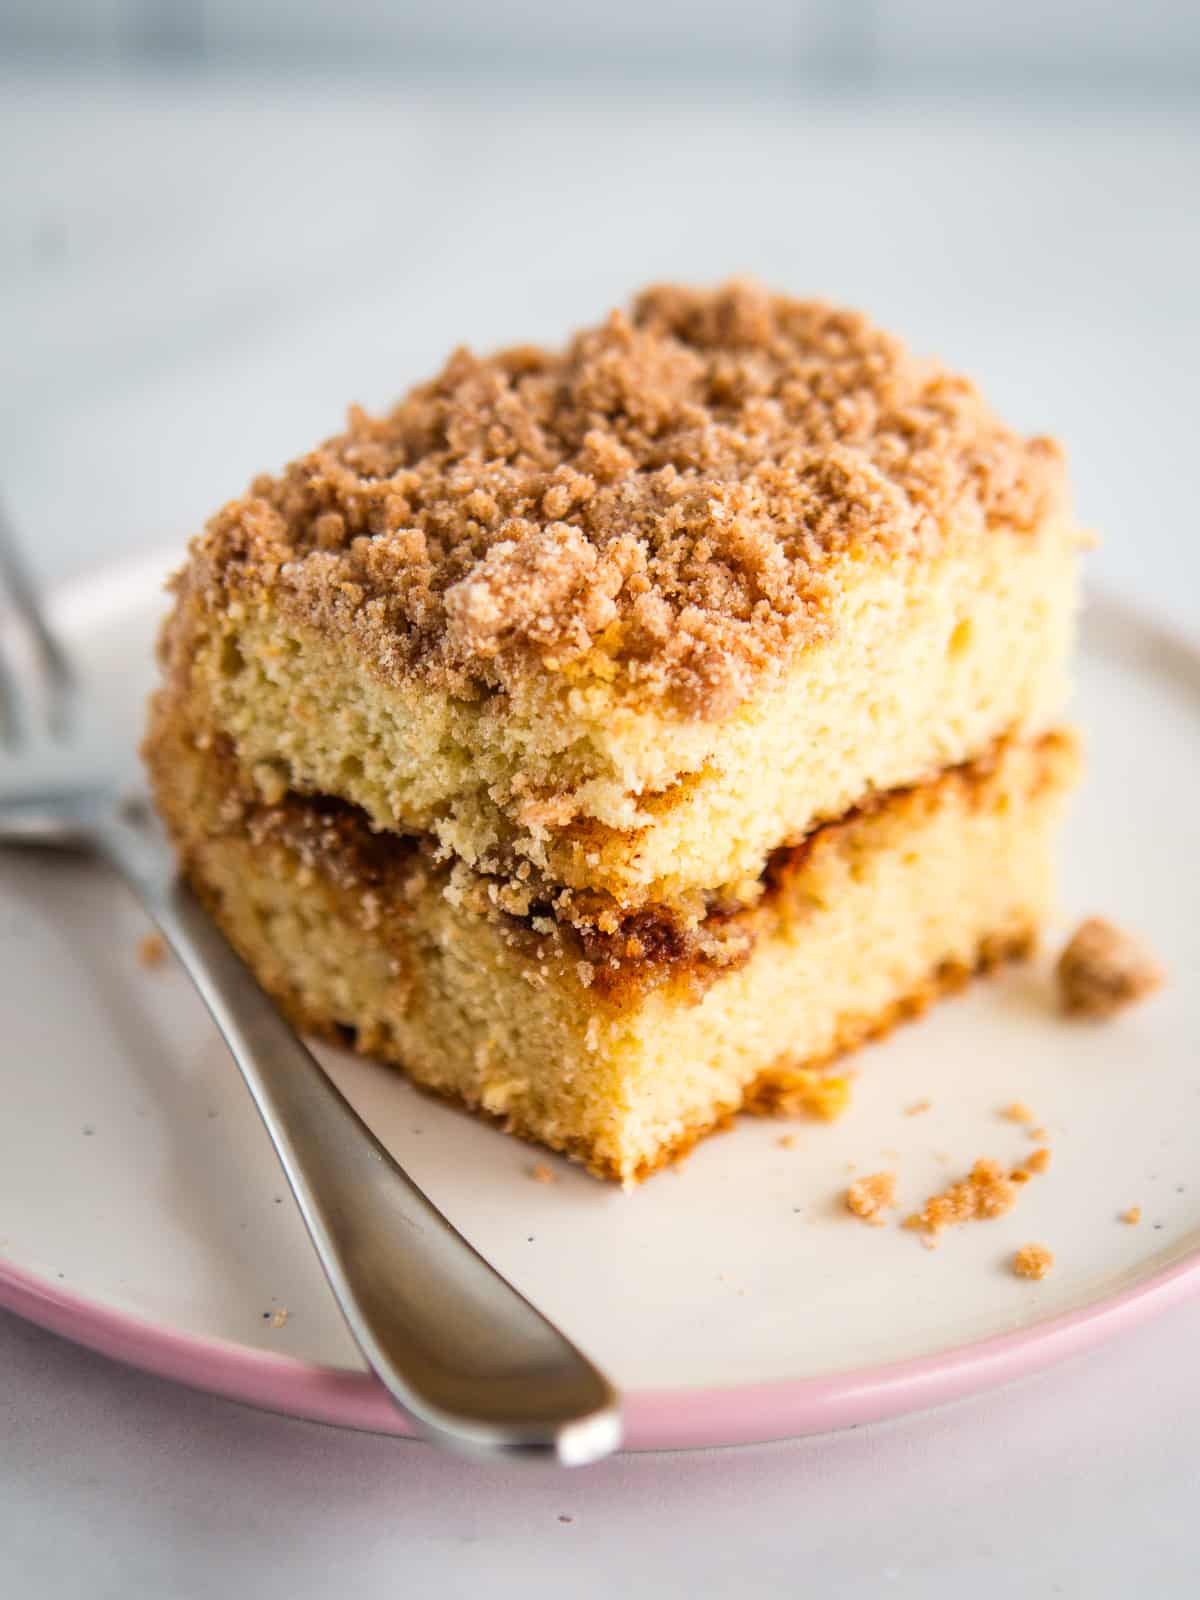 Gluten-free coffee cake slice on a plate with a fork.